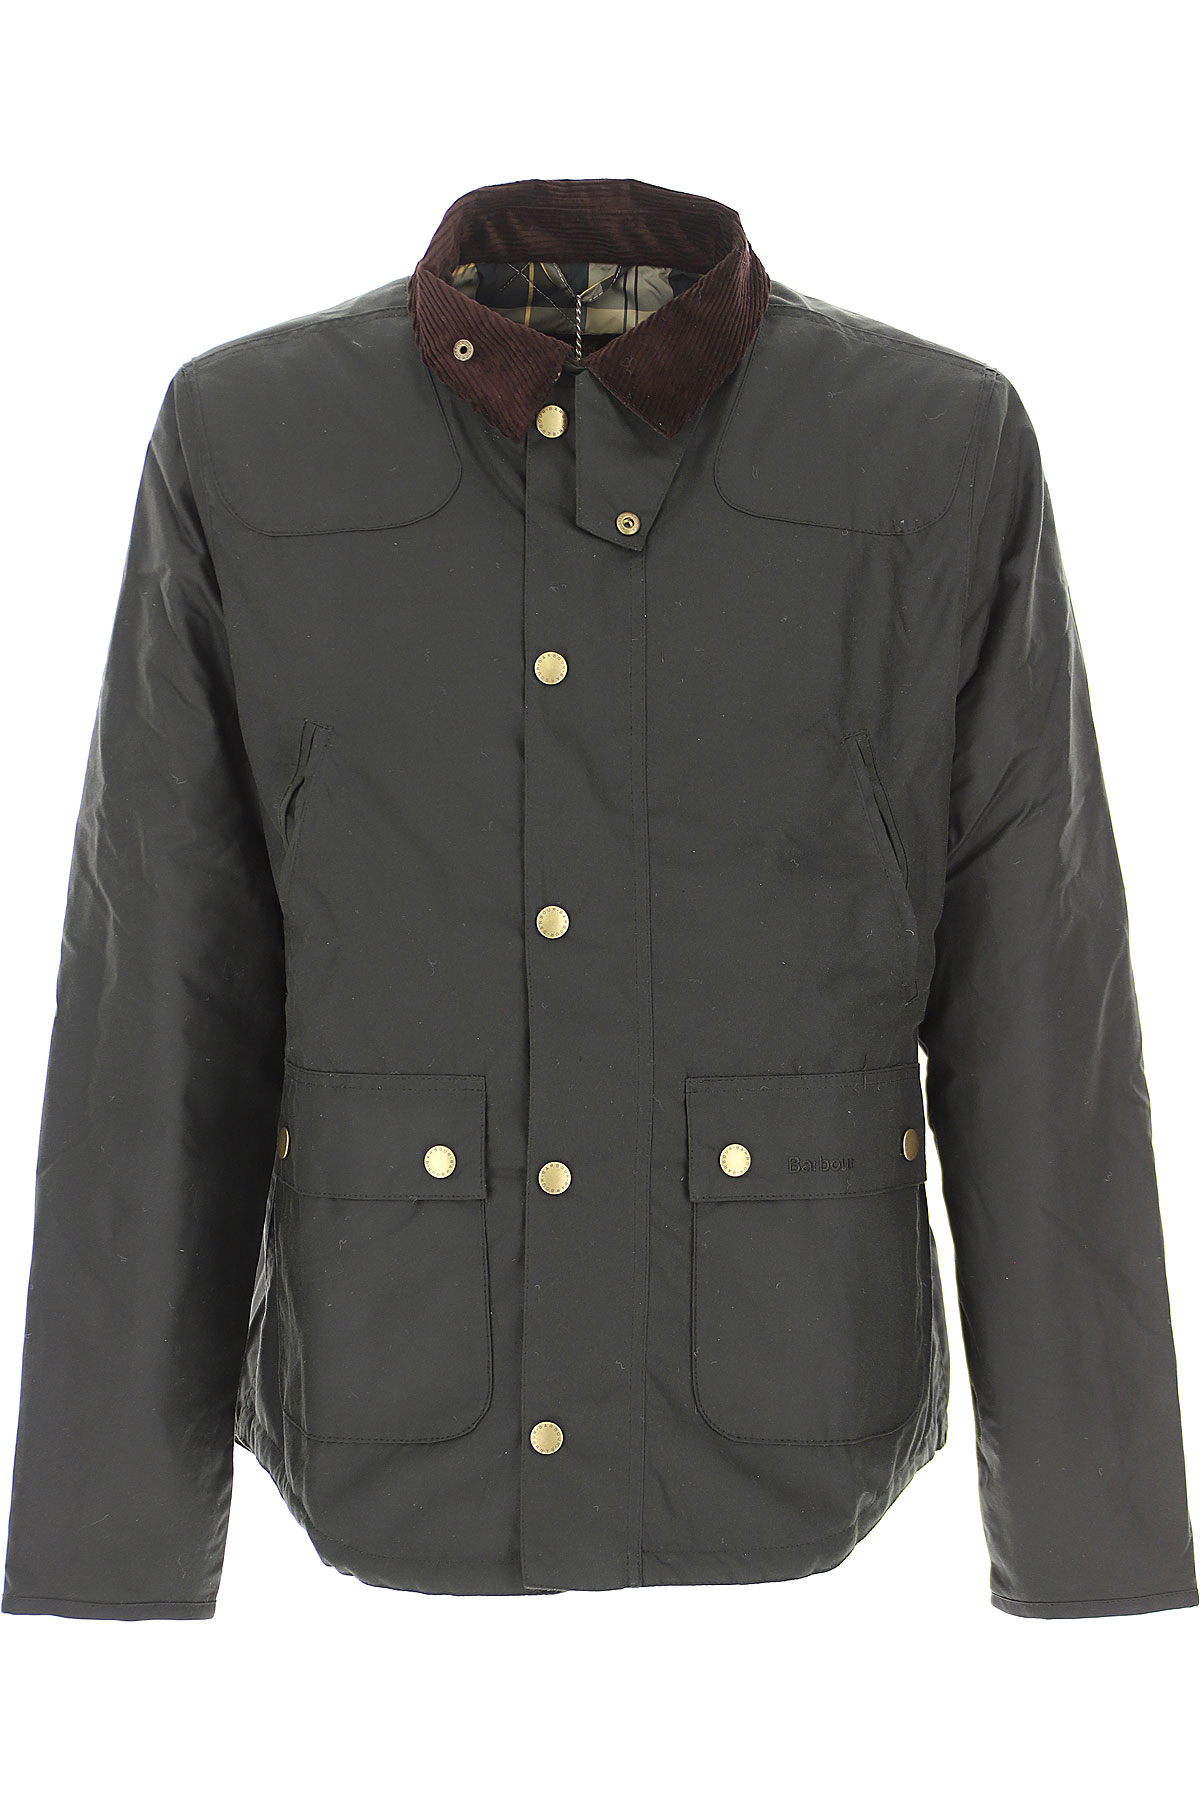 Mens Clothing Barbour, Style code: mwx1106-sg51-